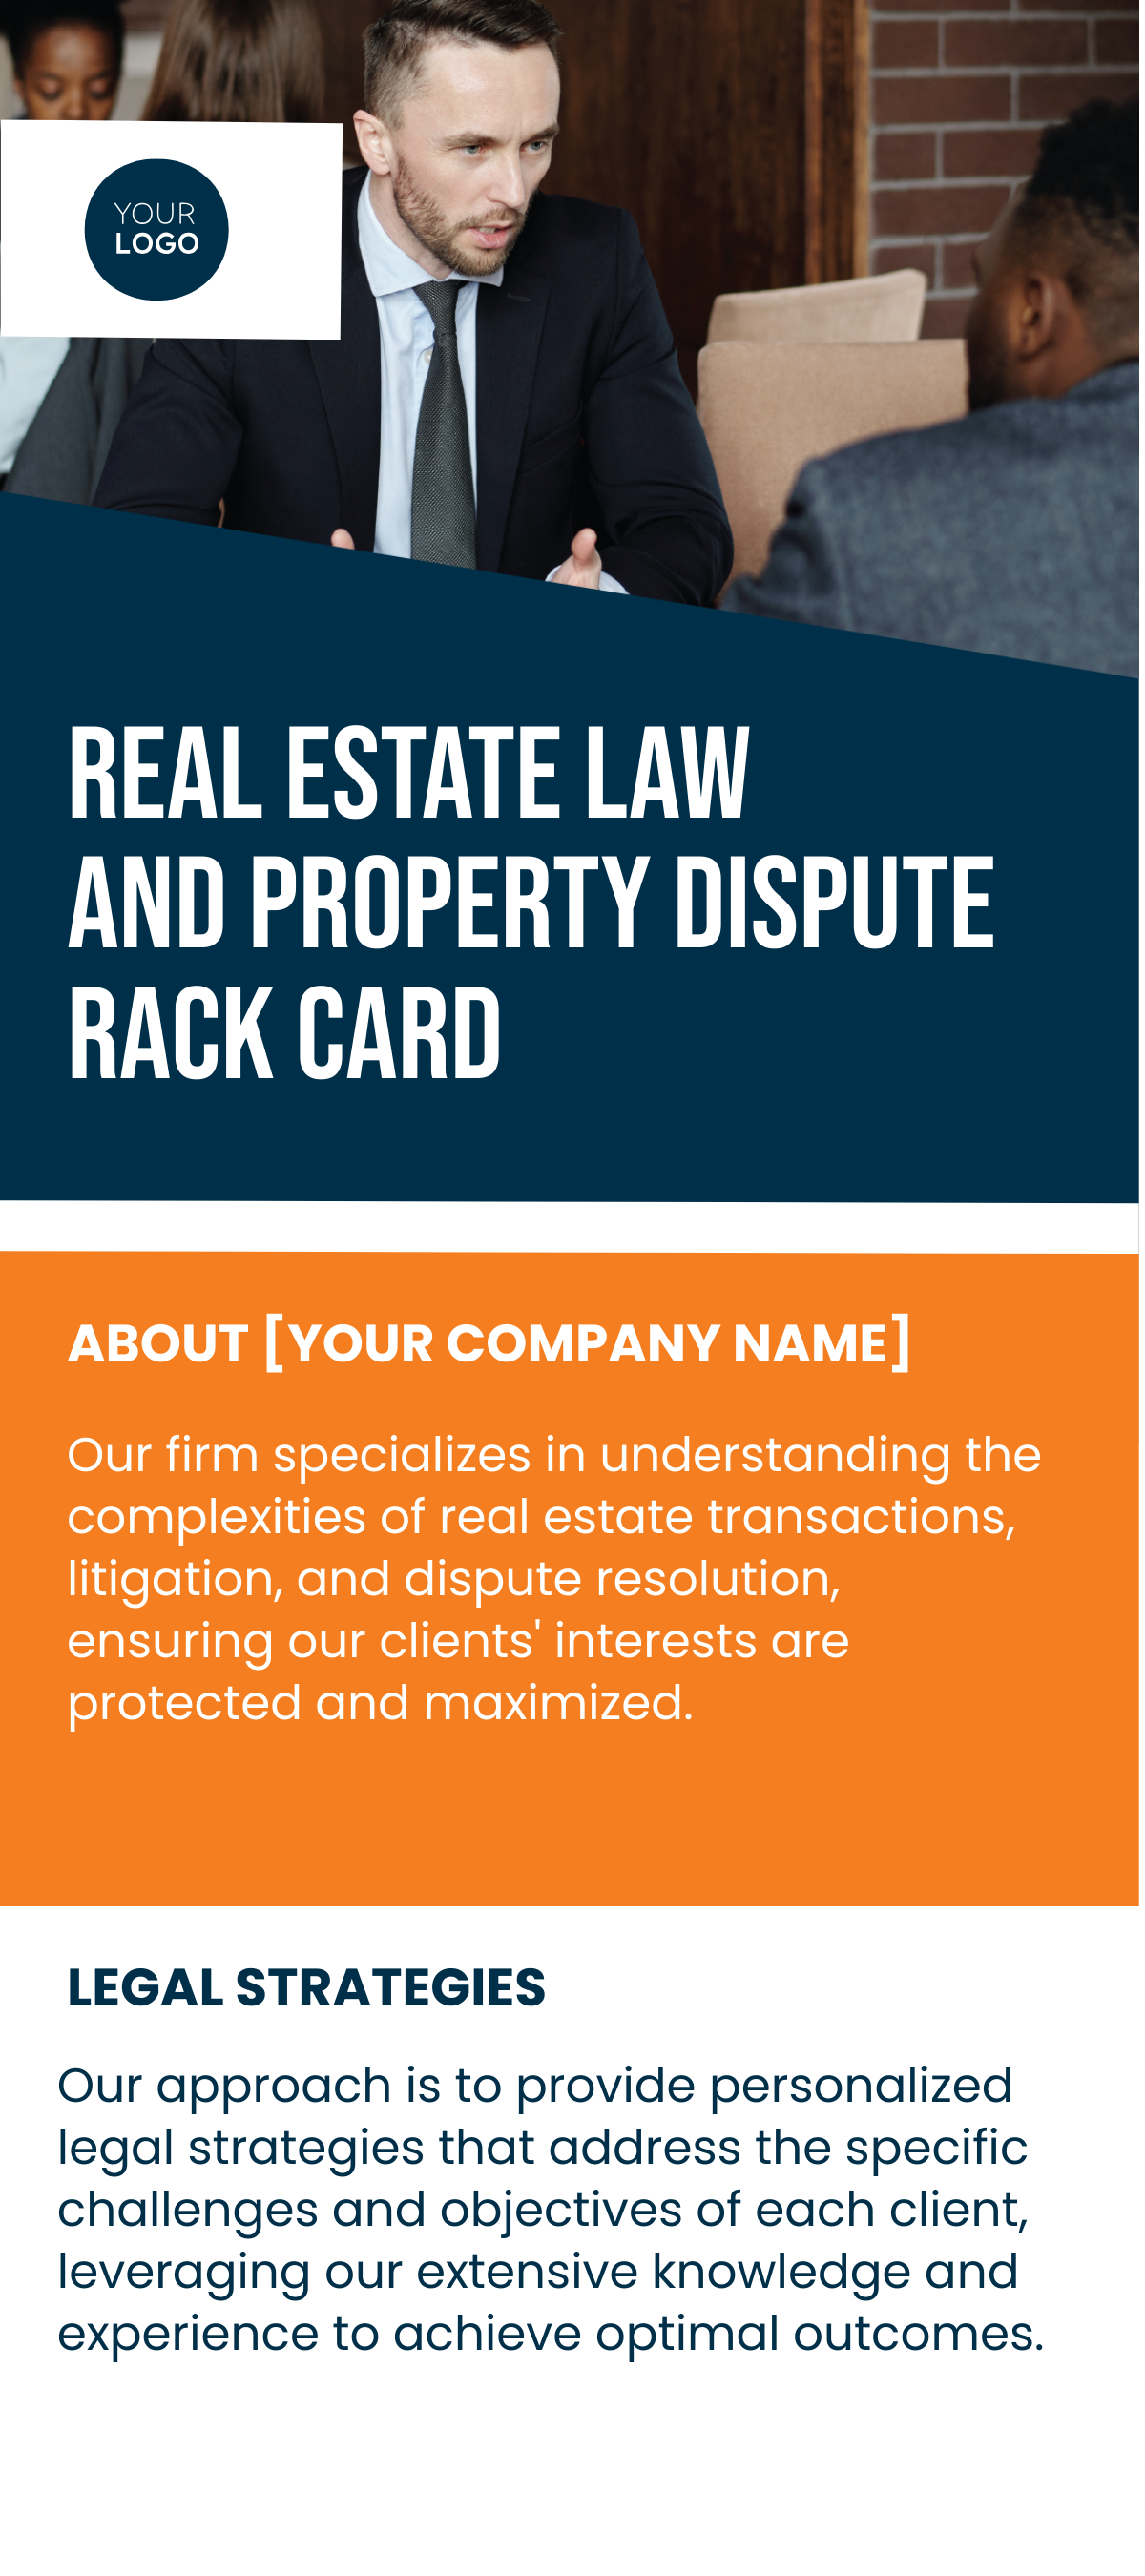 Real Estate Law and Property Dispute Rack Card